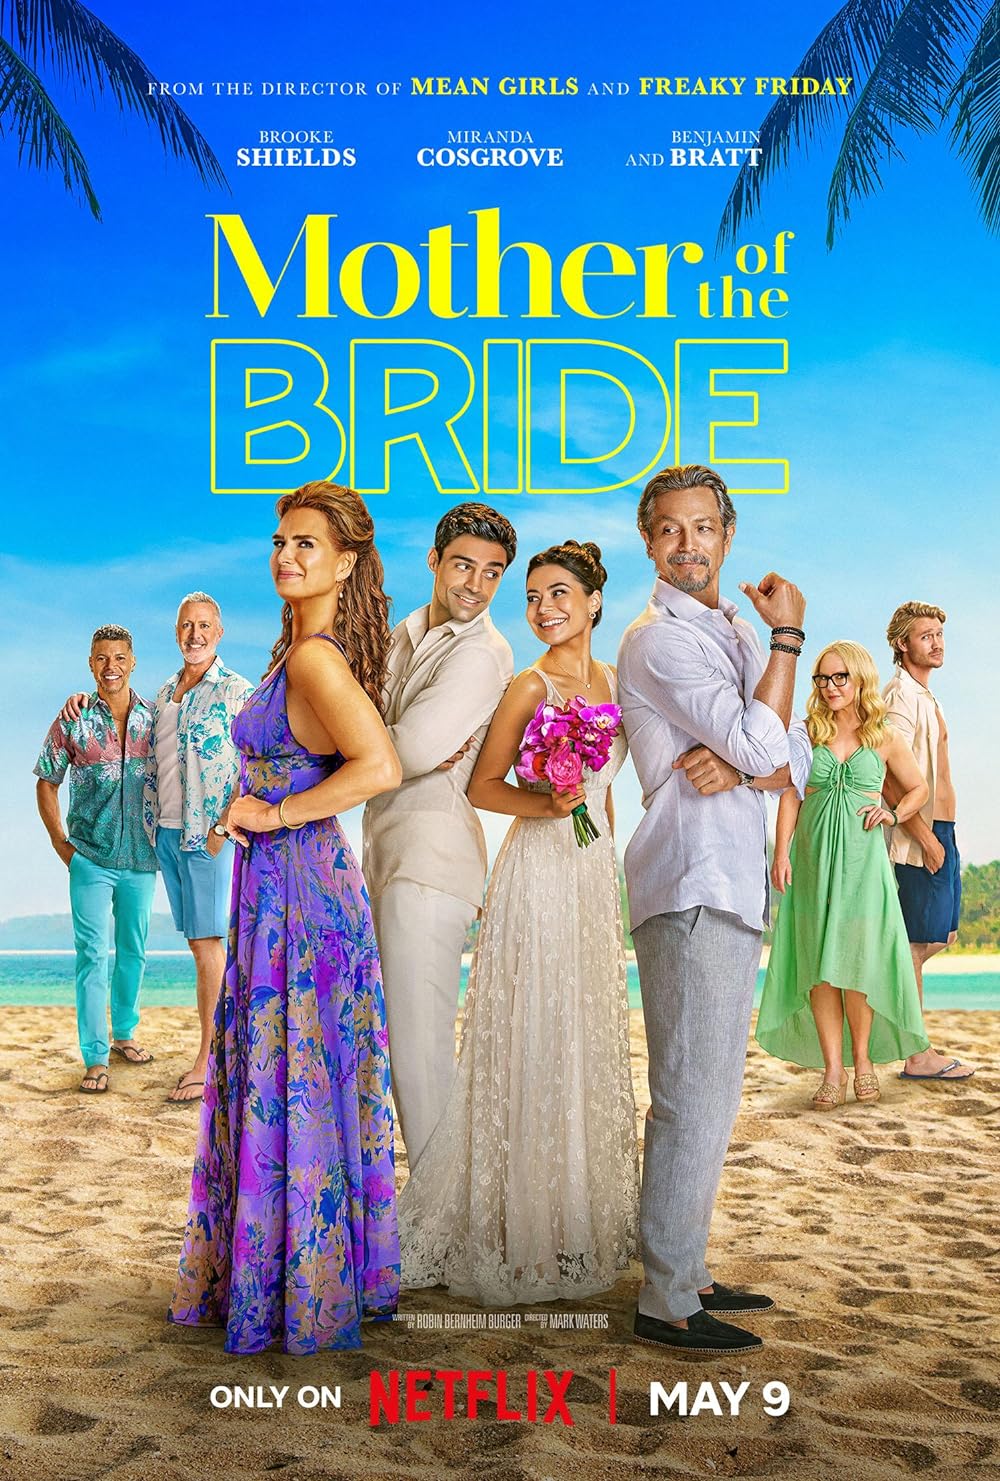 Mother of the Bride (Streaming on Netflix) - May 9Prepare for laughter and romance in 